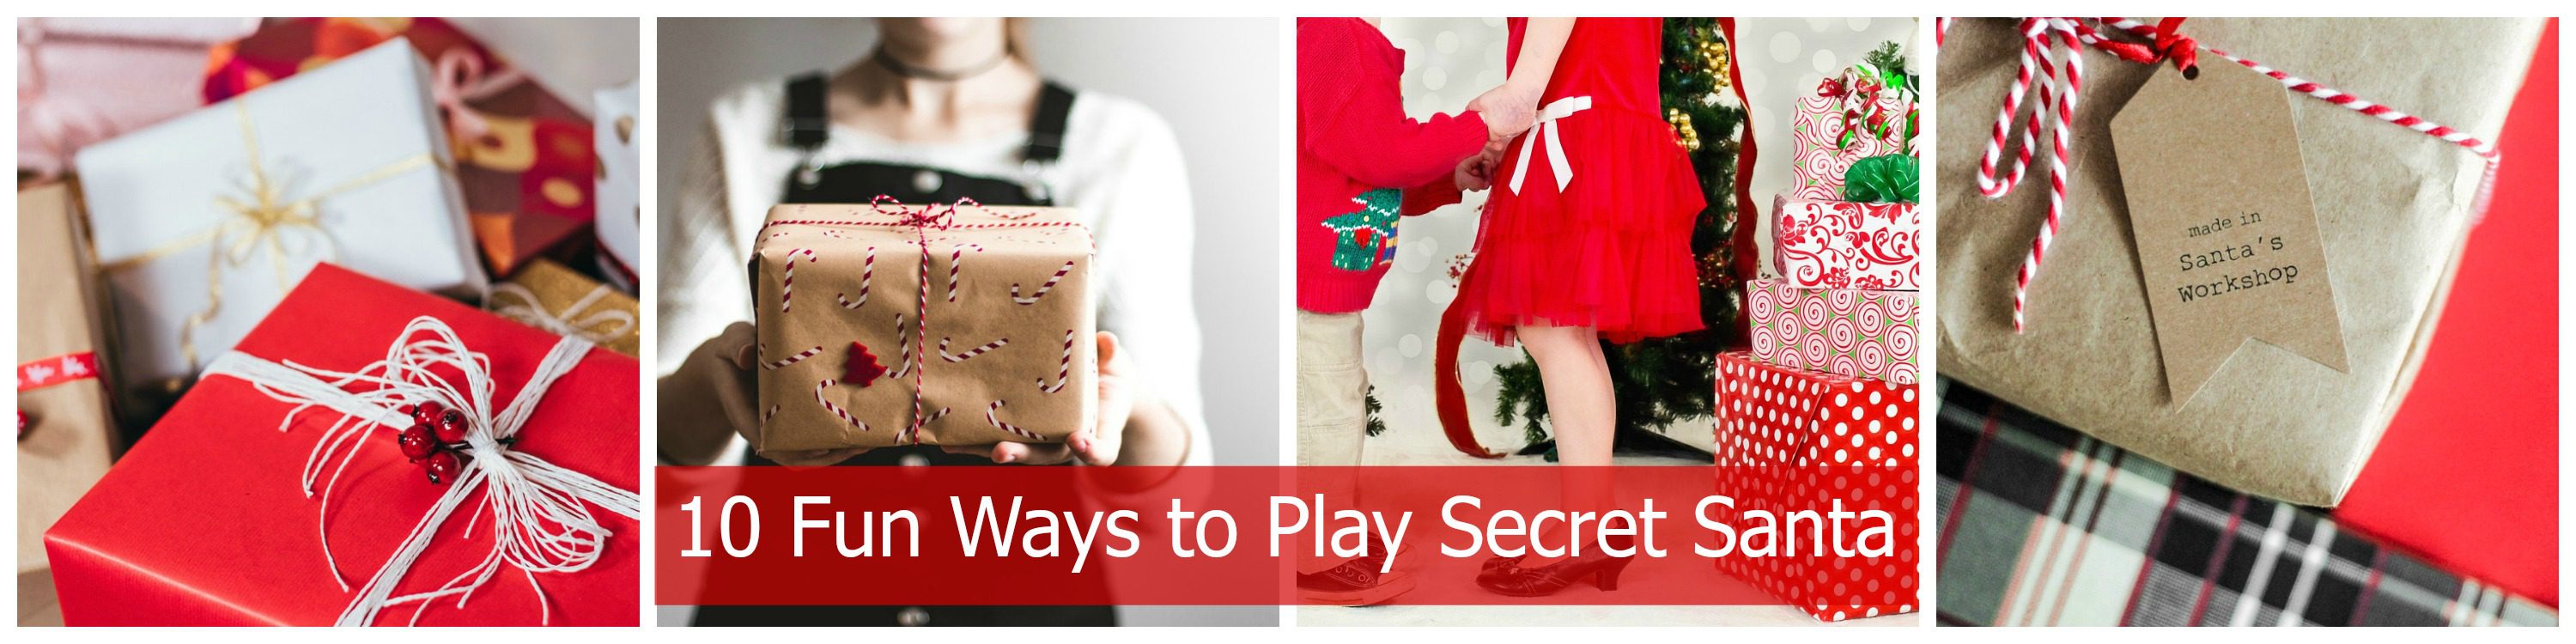 Top 20 Office Secret Santa Gift Ideas for a Memorable Holiday Exchange -  Personal House